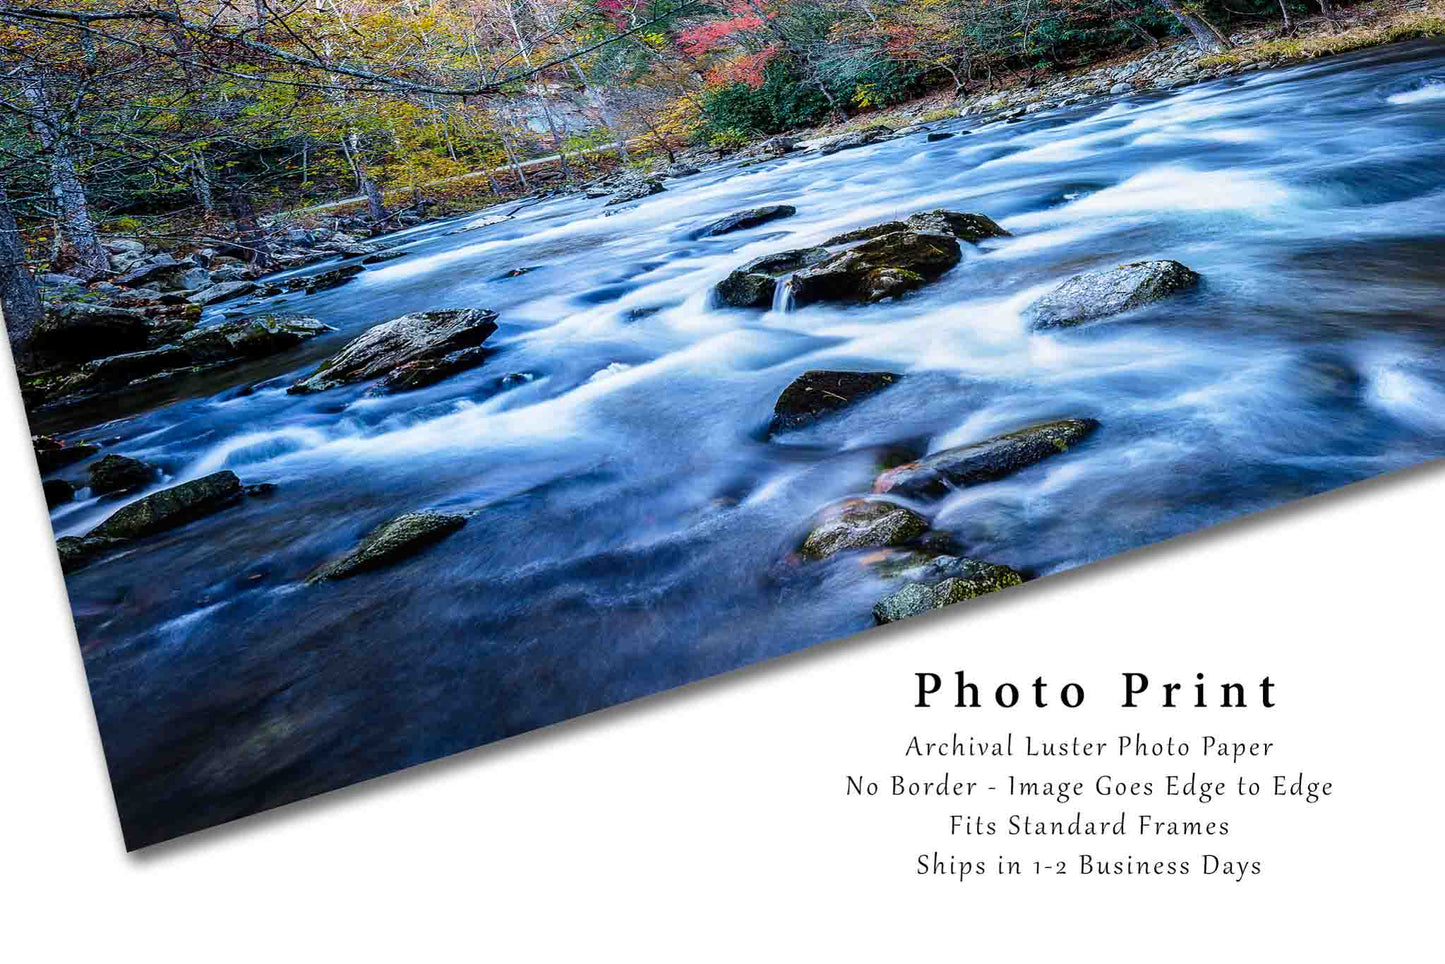 Fall in the Smokies - Print - Laurel Creek and Autumn Color in the Great Smoky Mountains of Tennessee